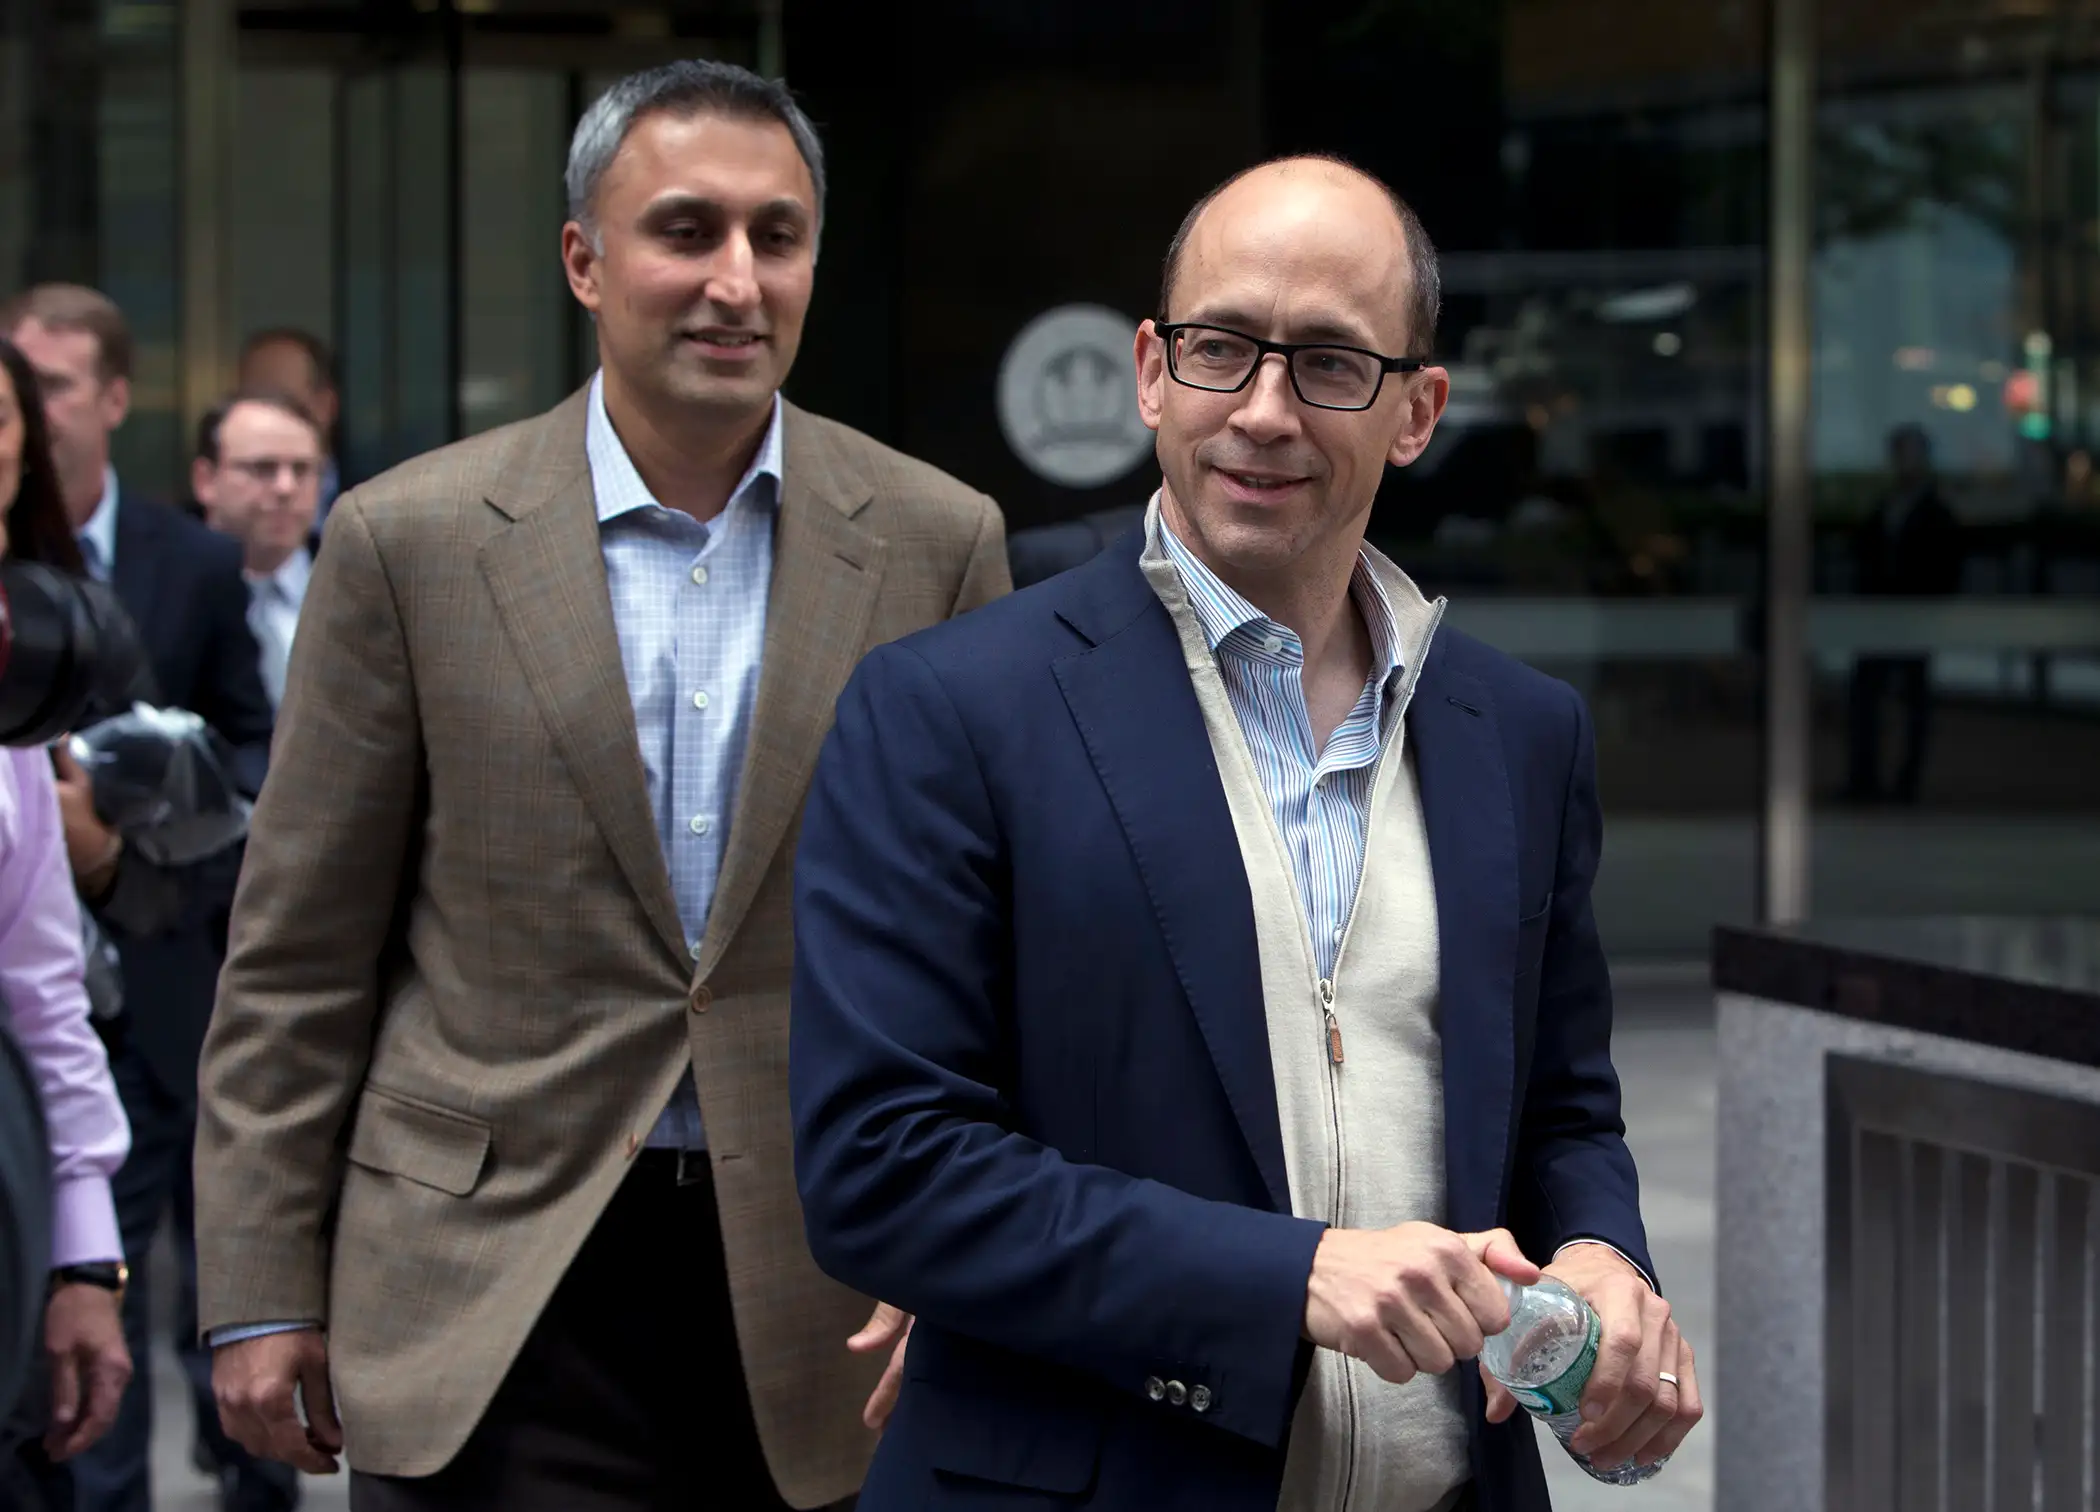 Mike Gupta, chief financial officer of Twitter Inc., left, and Richard  Dick  Costolo, chief executive officer of Twitter Inc., exit JPMorgan Chase &amp; Co. headquarters in New York, U.S., on Friday, Oct. 25, 2013. Twitter Inc. will make the case to potential investors in its initial public offering that it needs to keep spending to grow, and profit will come once it can reap the benefits of those investments.